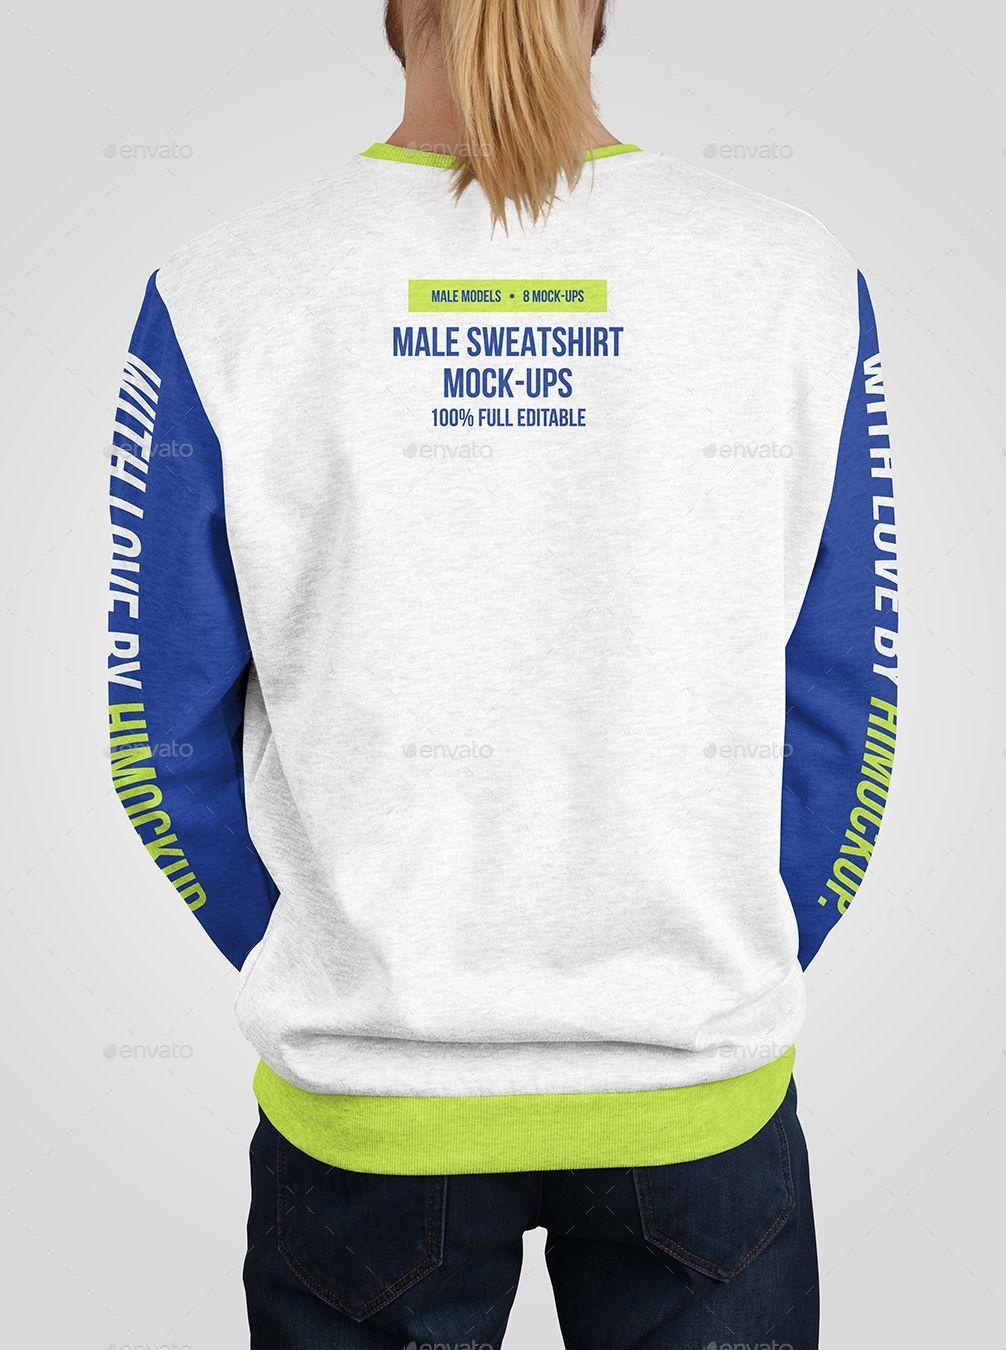 Clothing and Apparel Up Logo - Male Sweatshirt Mockups | Apparel | Sweatshirts, Mockup, Shirts